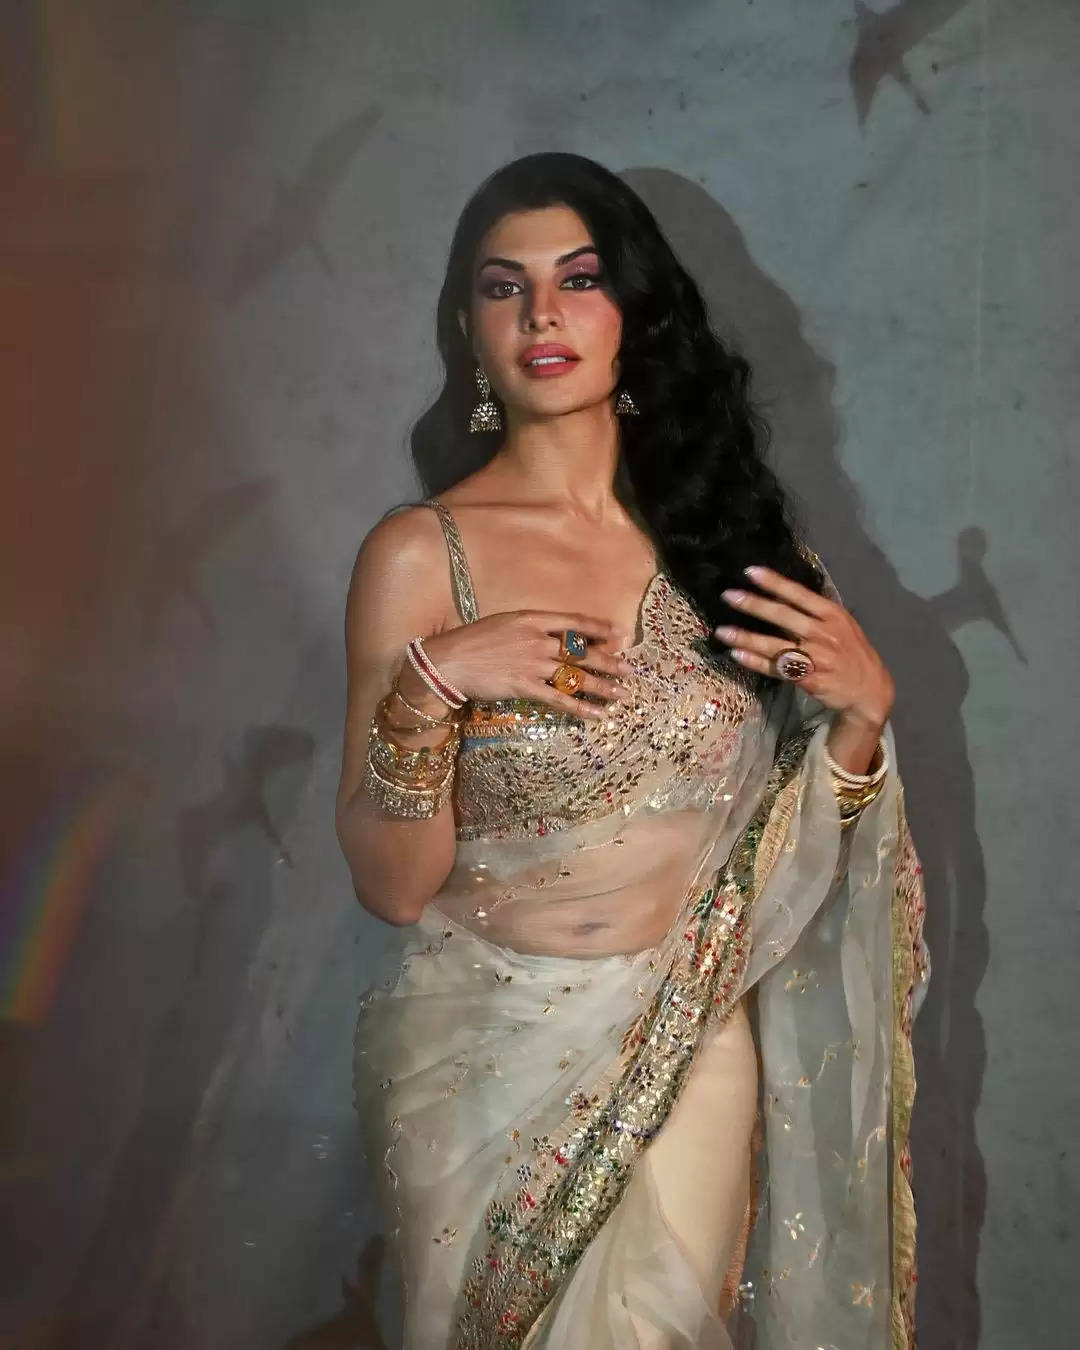 Jacqueline Fernandez looks pretty as she wears plum-coloured saree.  Jacqueline Fernandez is a sight to behold in matching embellished blouse.  Jacqueline Fernandez looks drop dead gorgeous in semi-sheer scalloped saree.  Jacqueline Fernandez opts for a sleeveless ornate blouse.  Jacqueline Fernandez makes jaw drop in floral-printed neon green saree.  Jacqueline Fernandez pairs the saree with a complimentary blouse.  Jacqueline Fernandez oozes oomph as she poses in off-white embellished saree.  Jacqueline Fernandez pairs the saree with a matching blouse.  Jacqueline Fernandez looks stunning in a tradtional golden saree.  Jacqueline Fernandez pairs the bright blue blouse with the saree.